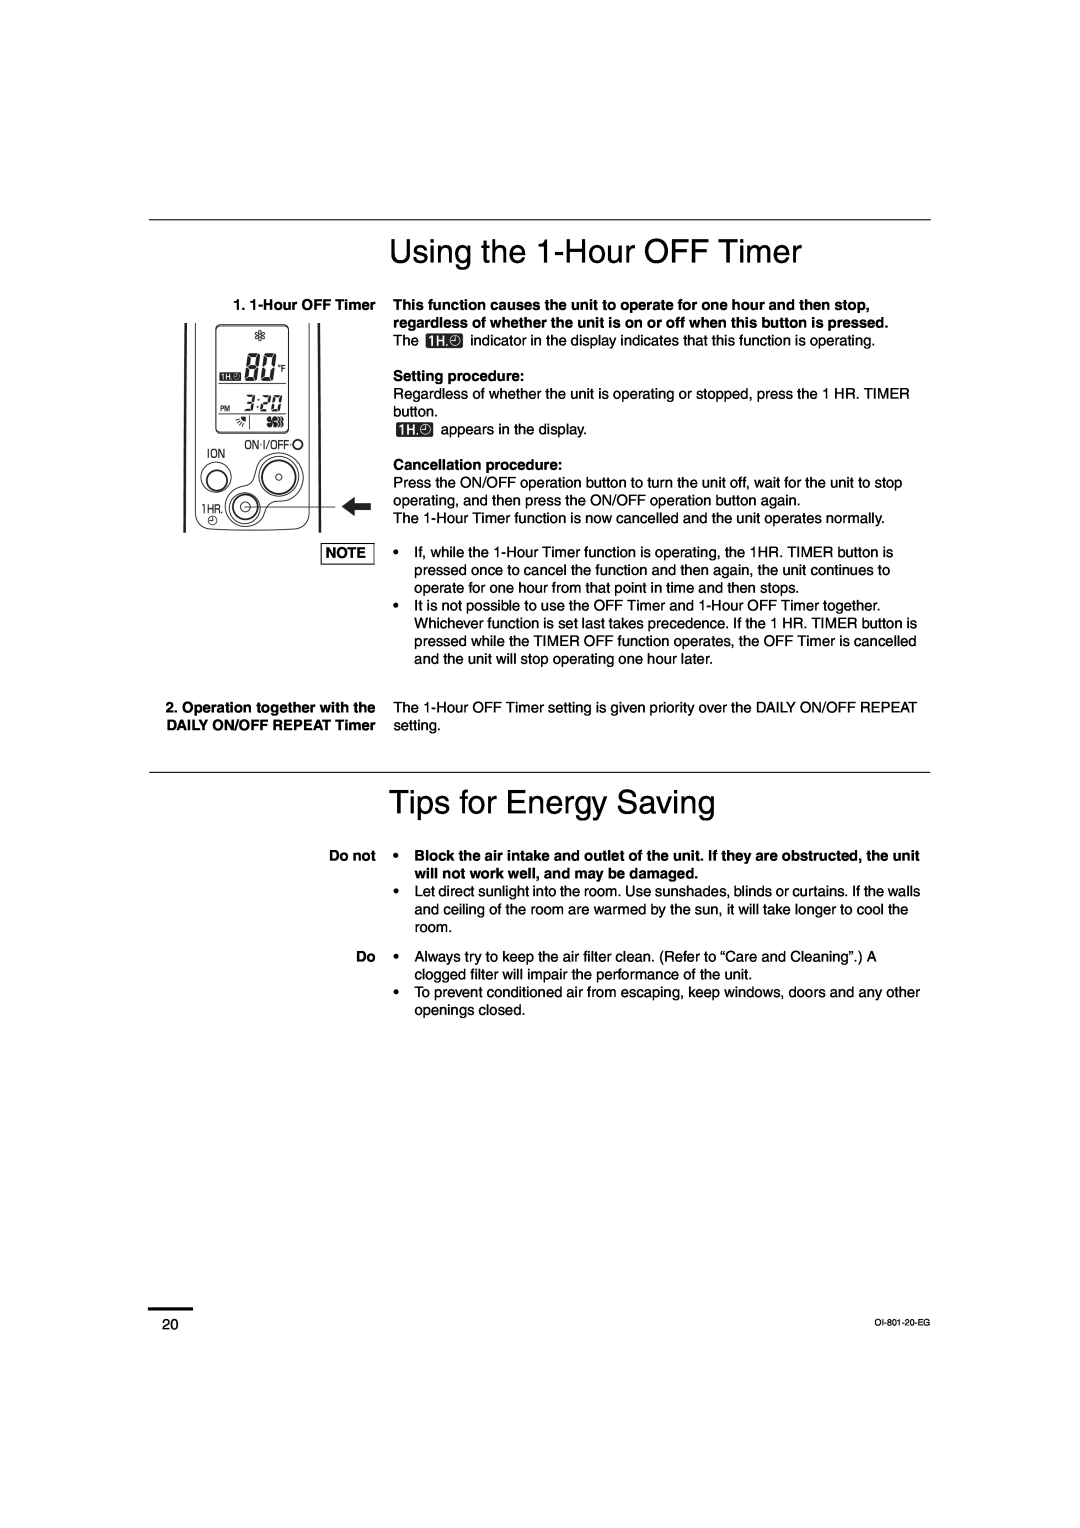 Sanyo CH2472, CH1872 service manual Using the 1-HourOFF Timer, Tips for Energy Saving 